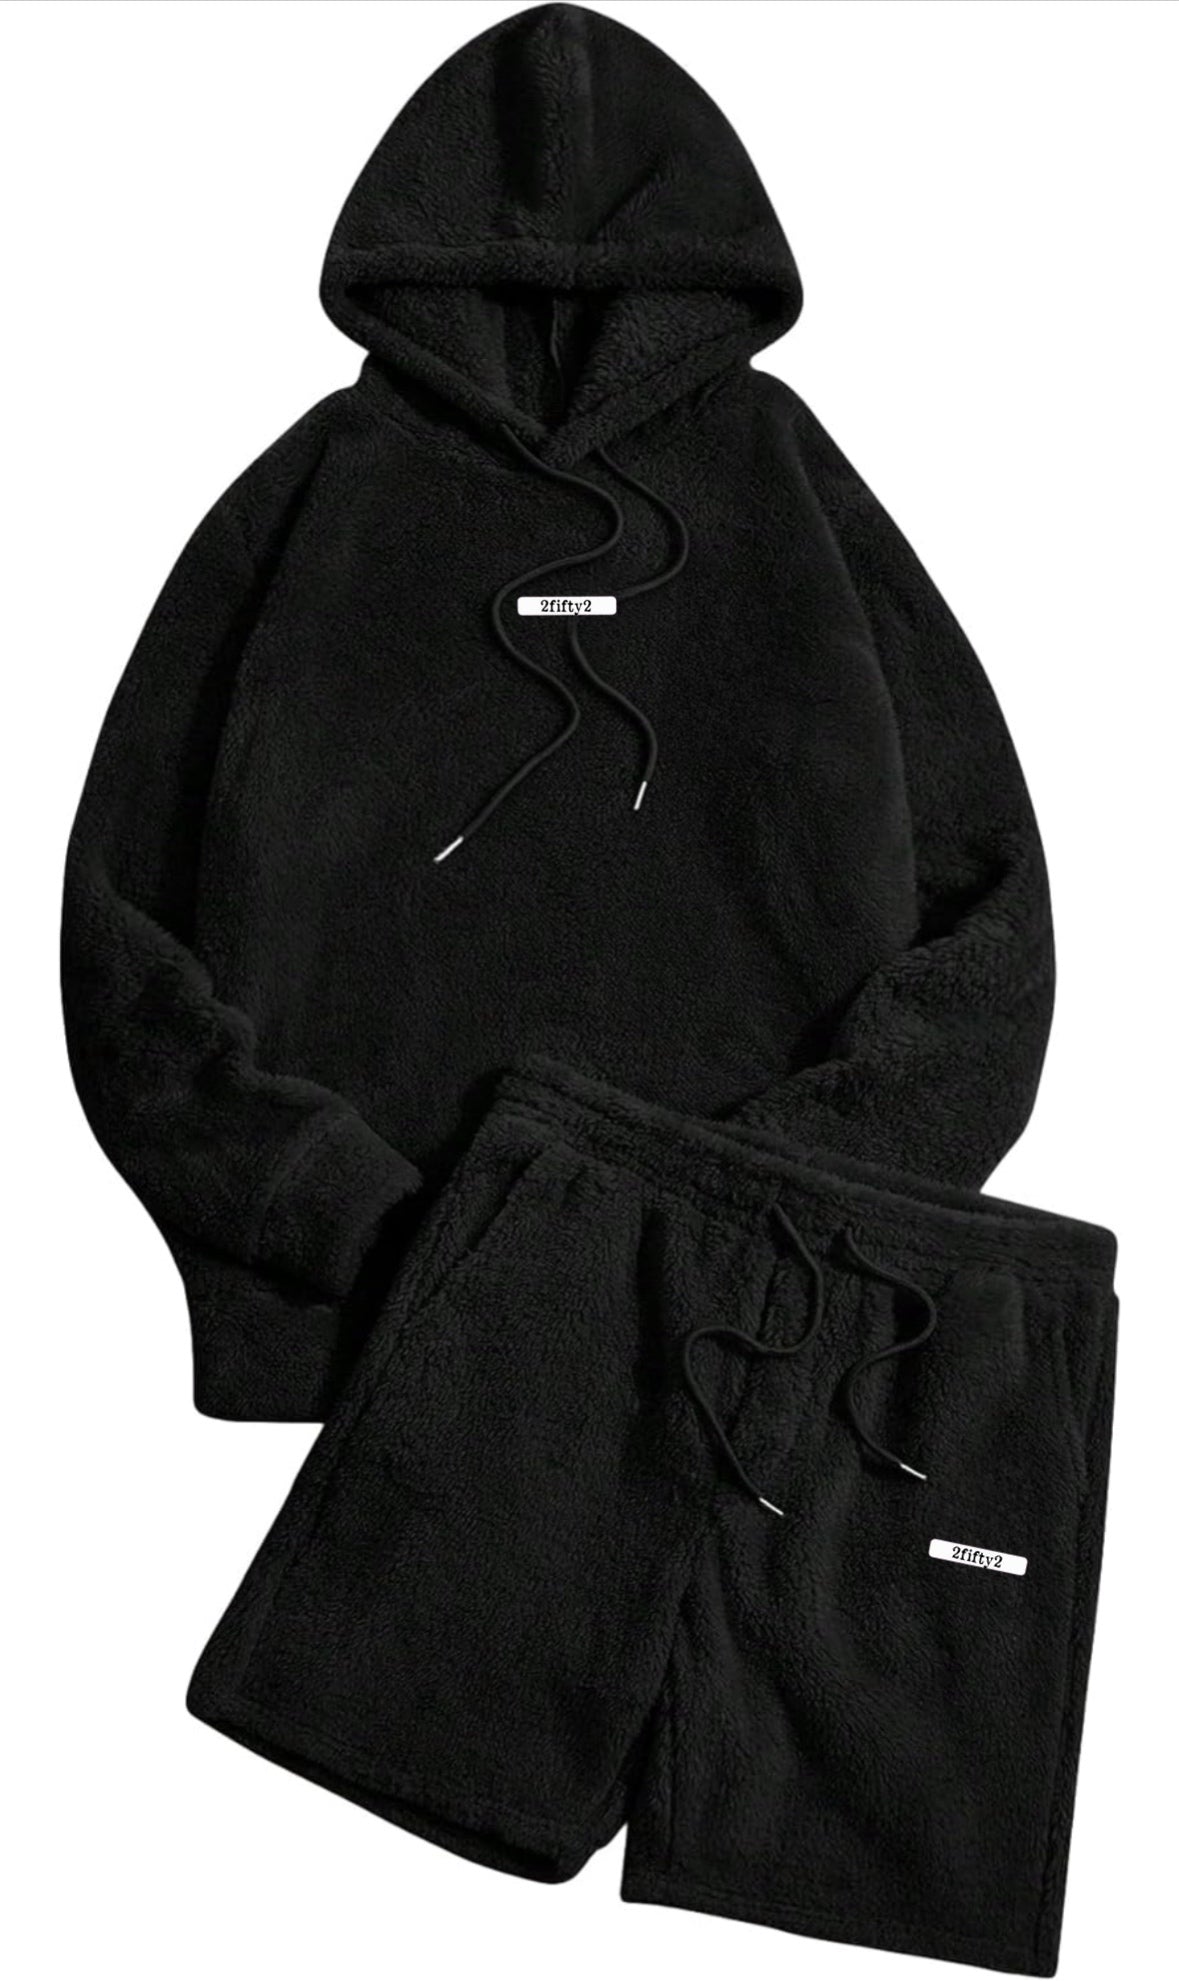 Men’s Sherpa shorts set with hoodie